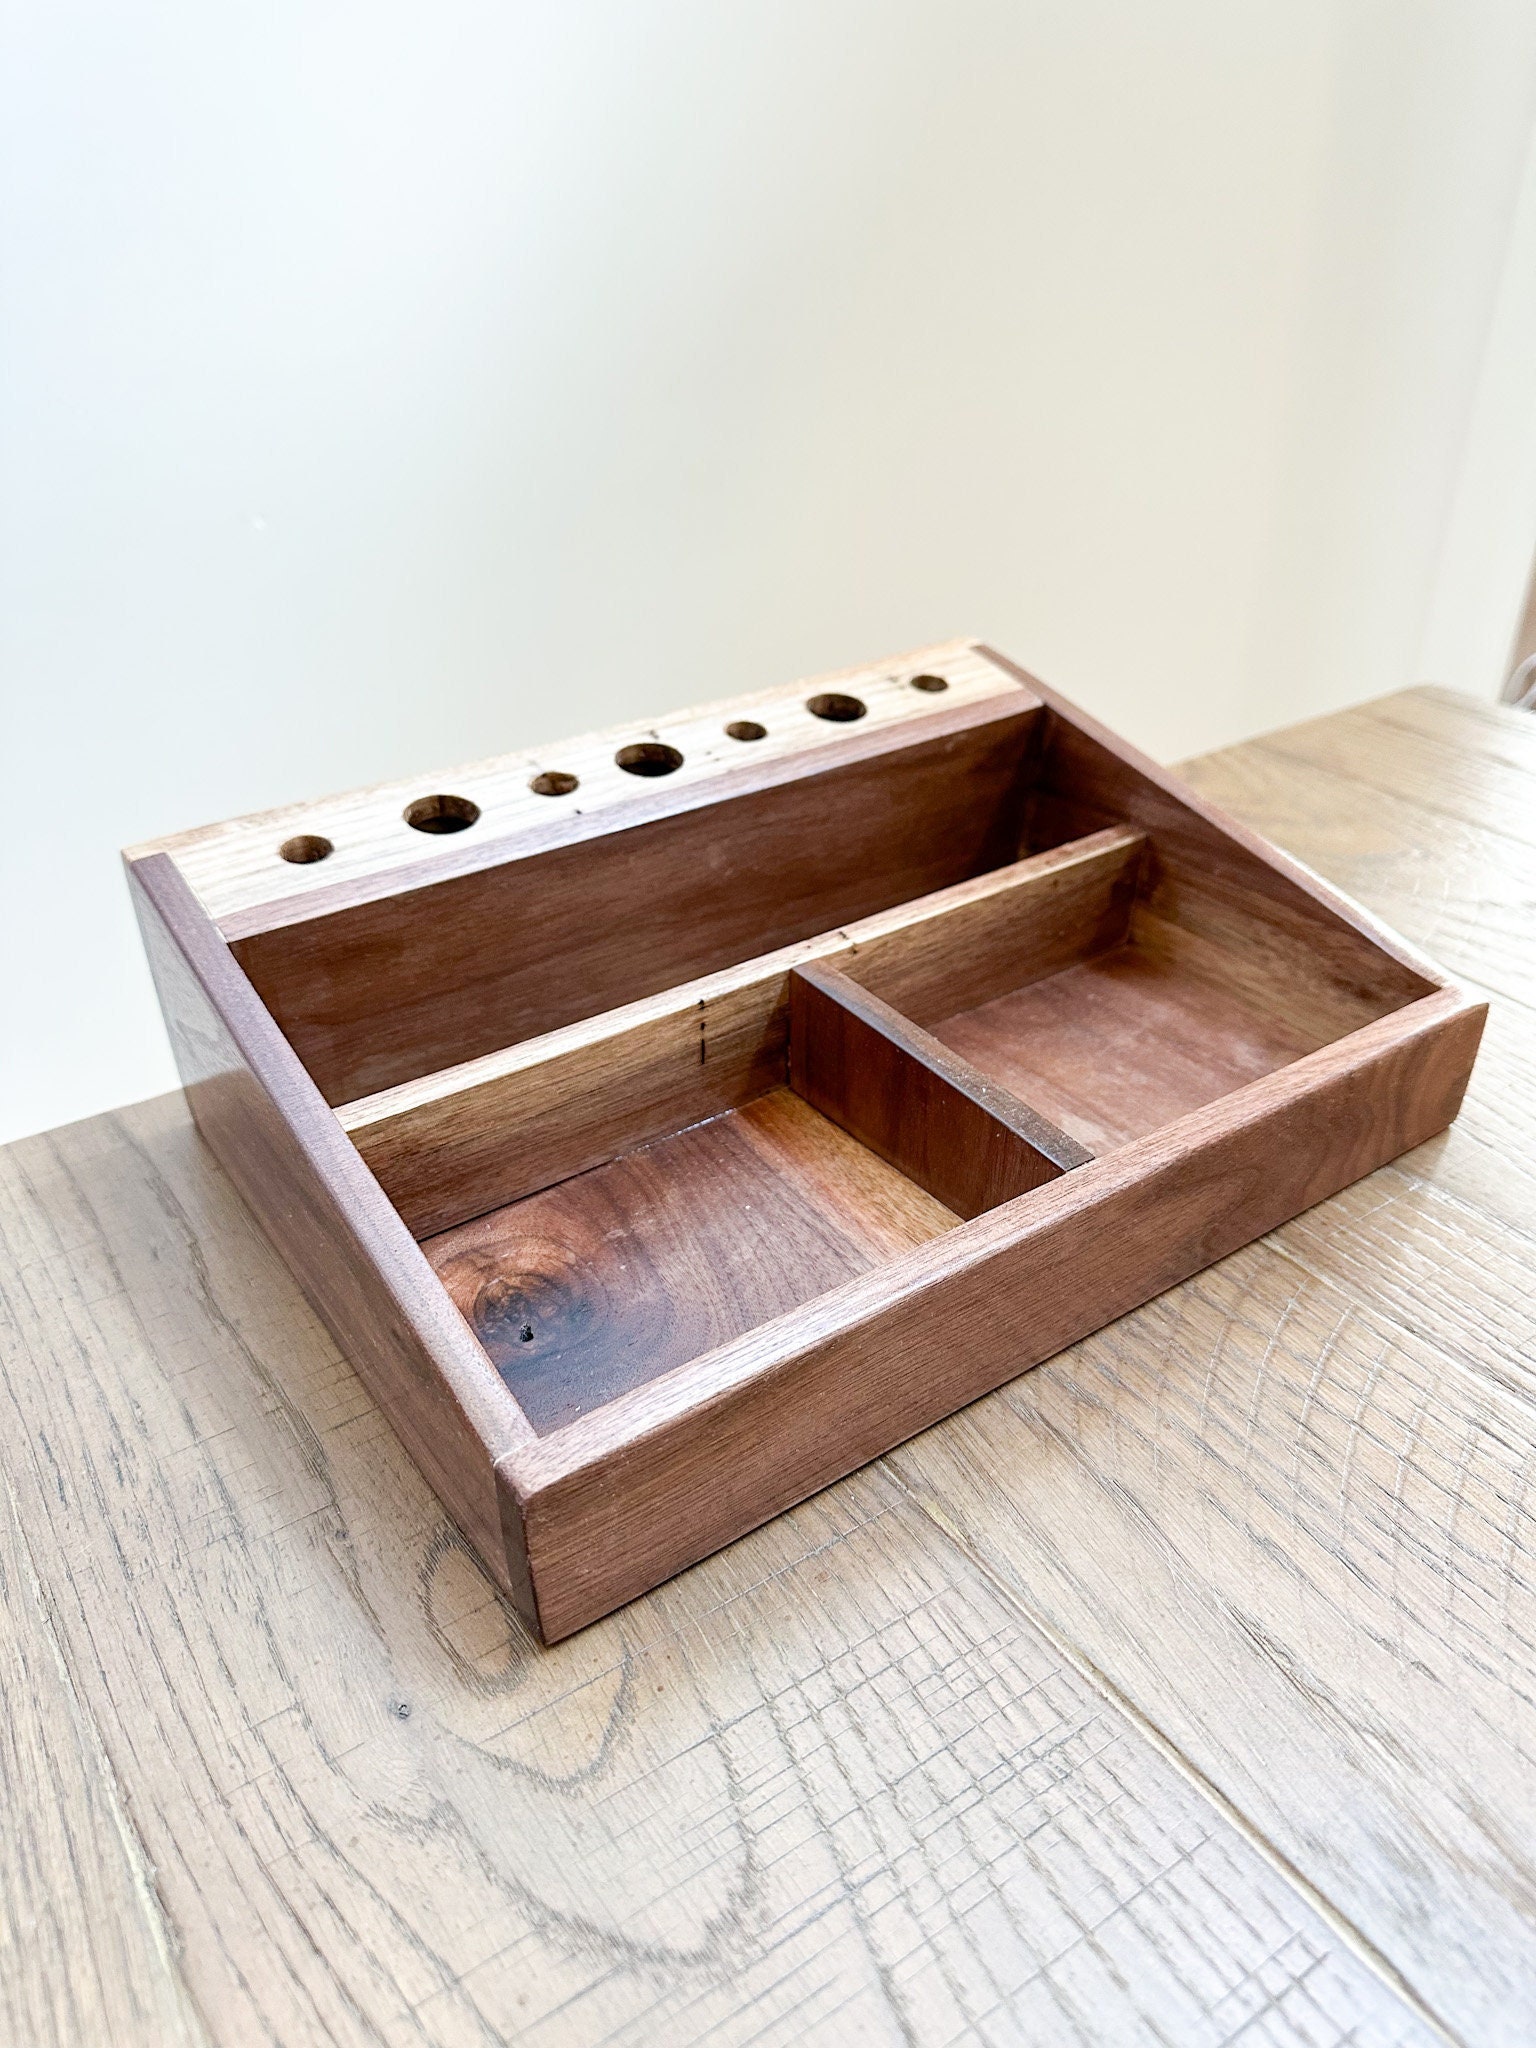 Caddy for Makeup – Free Woodworking Plan.com